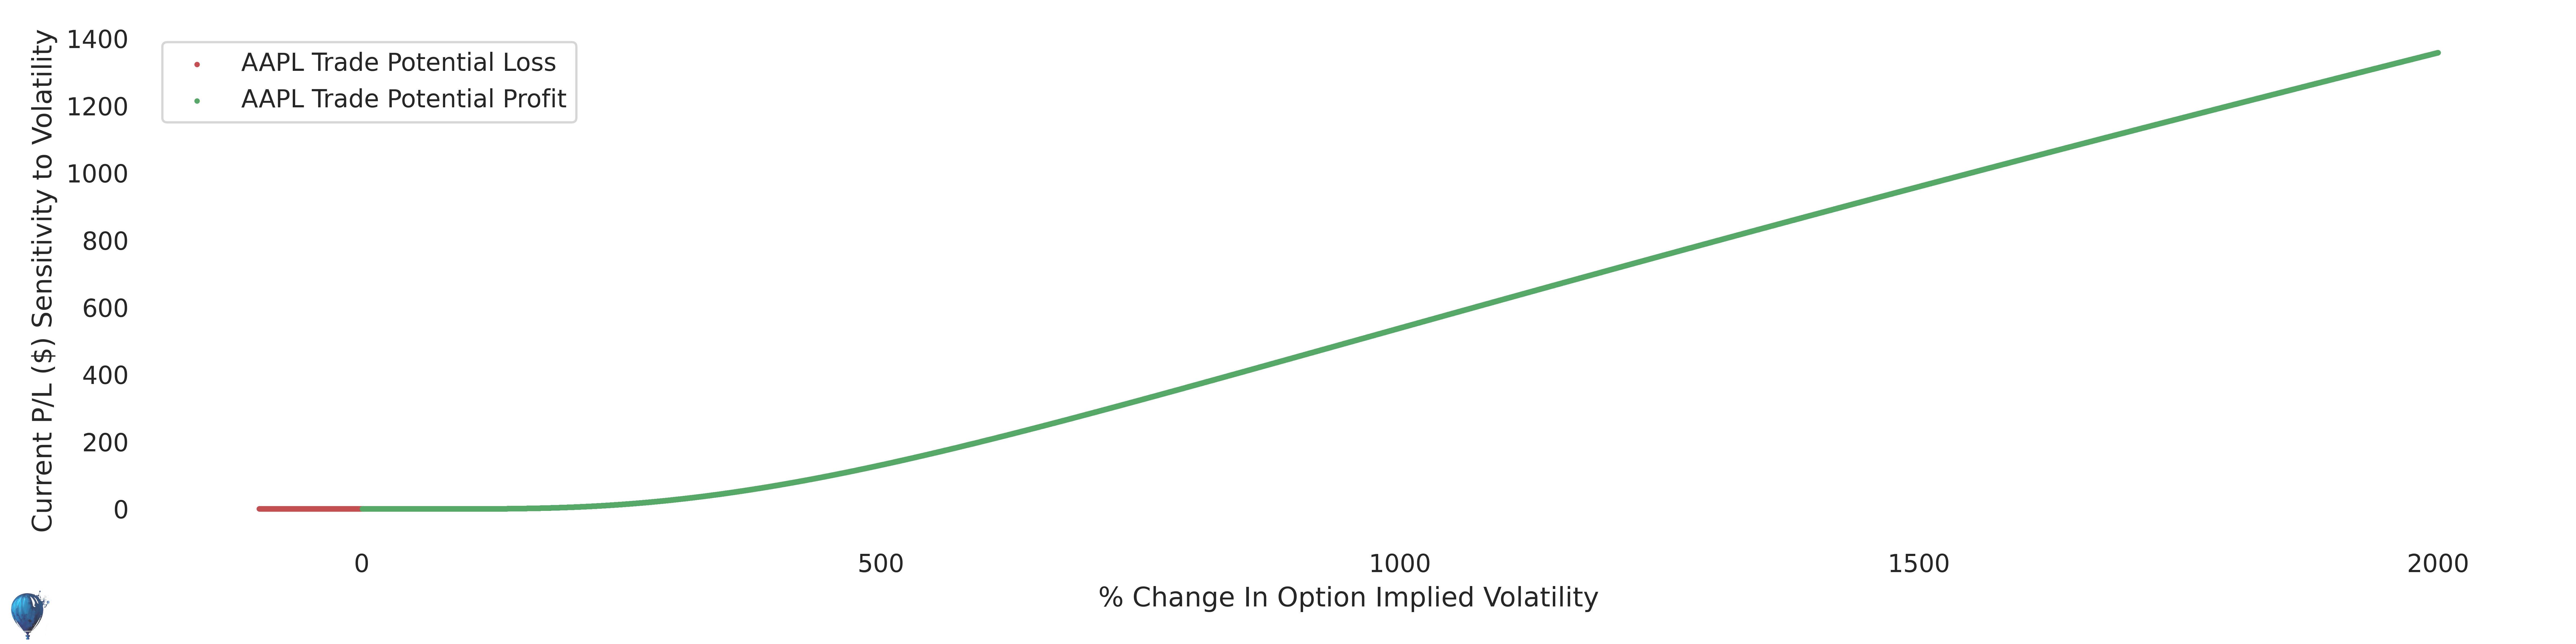 AAPL trade sensitivity to volatility